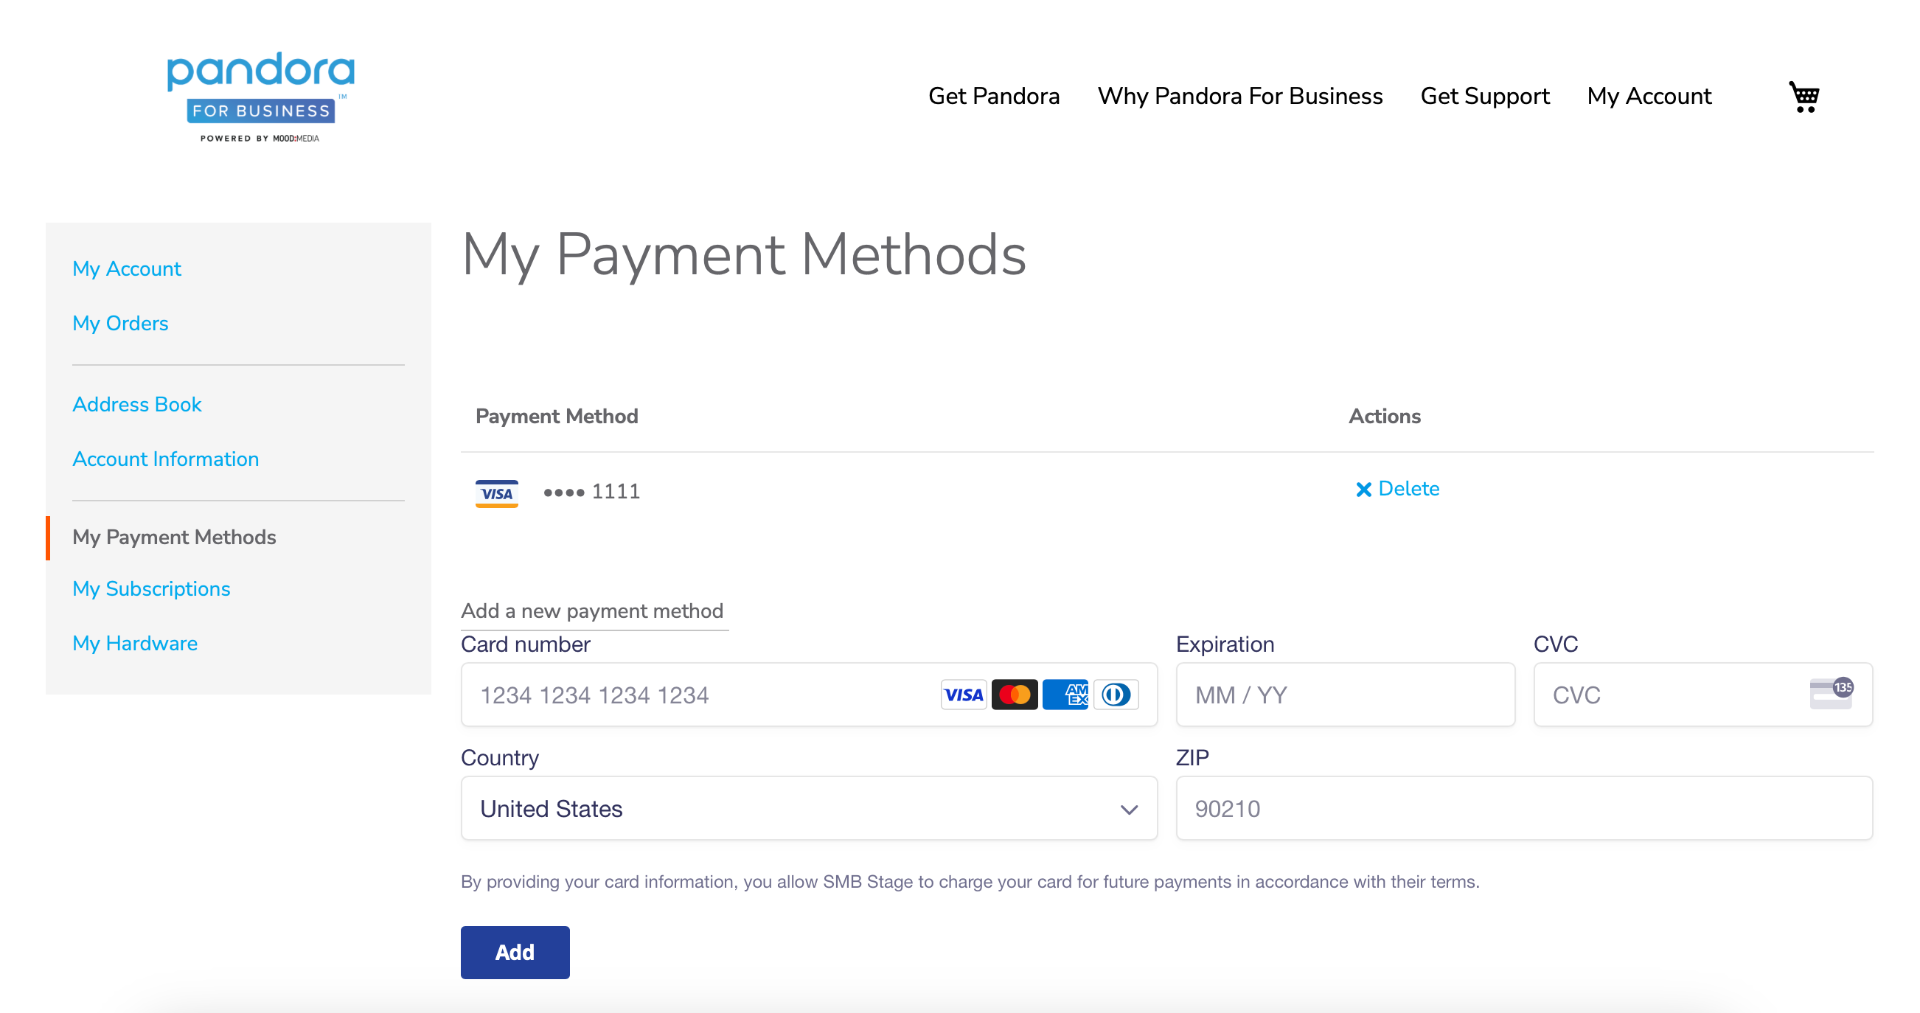 My Payment Methods